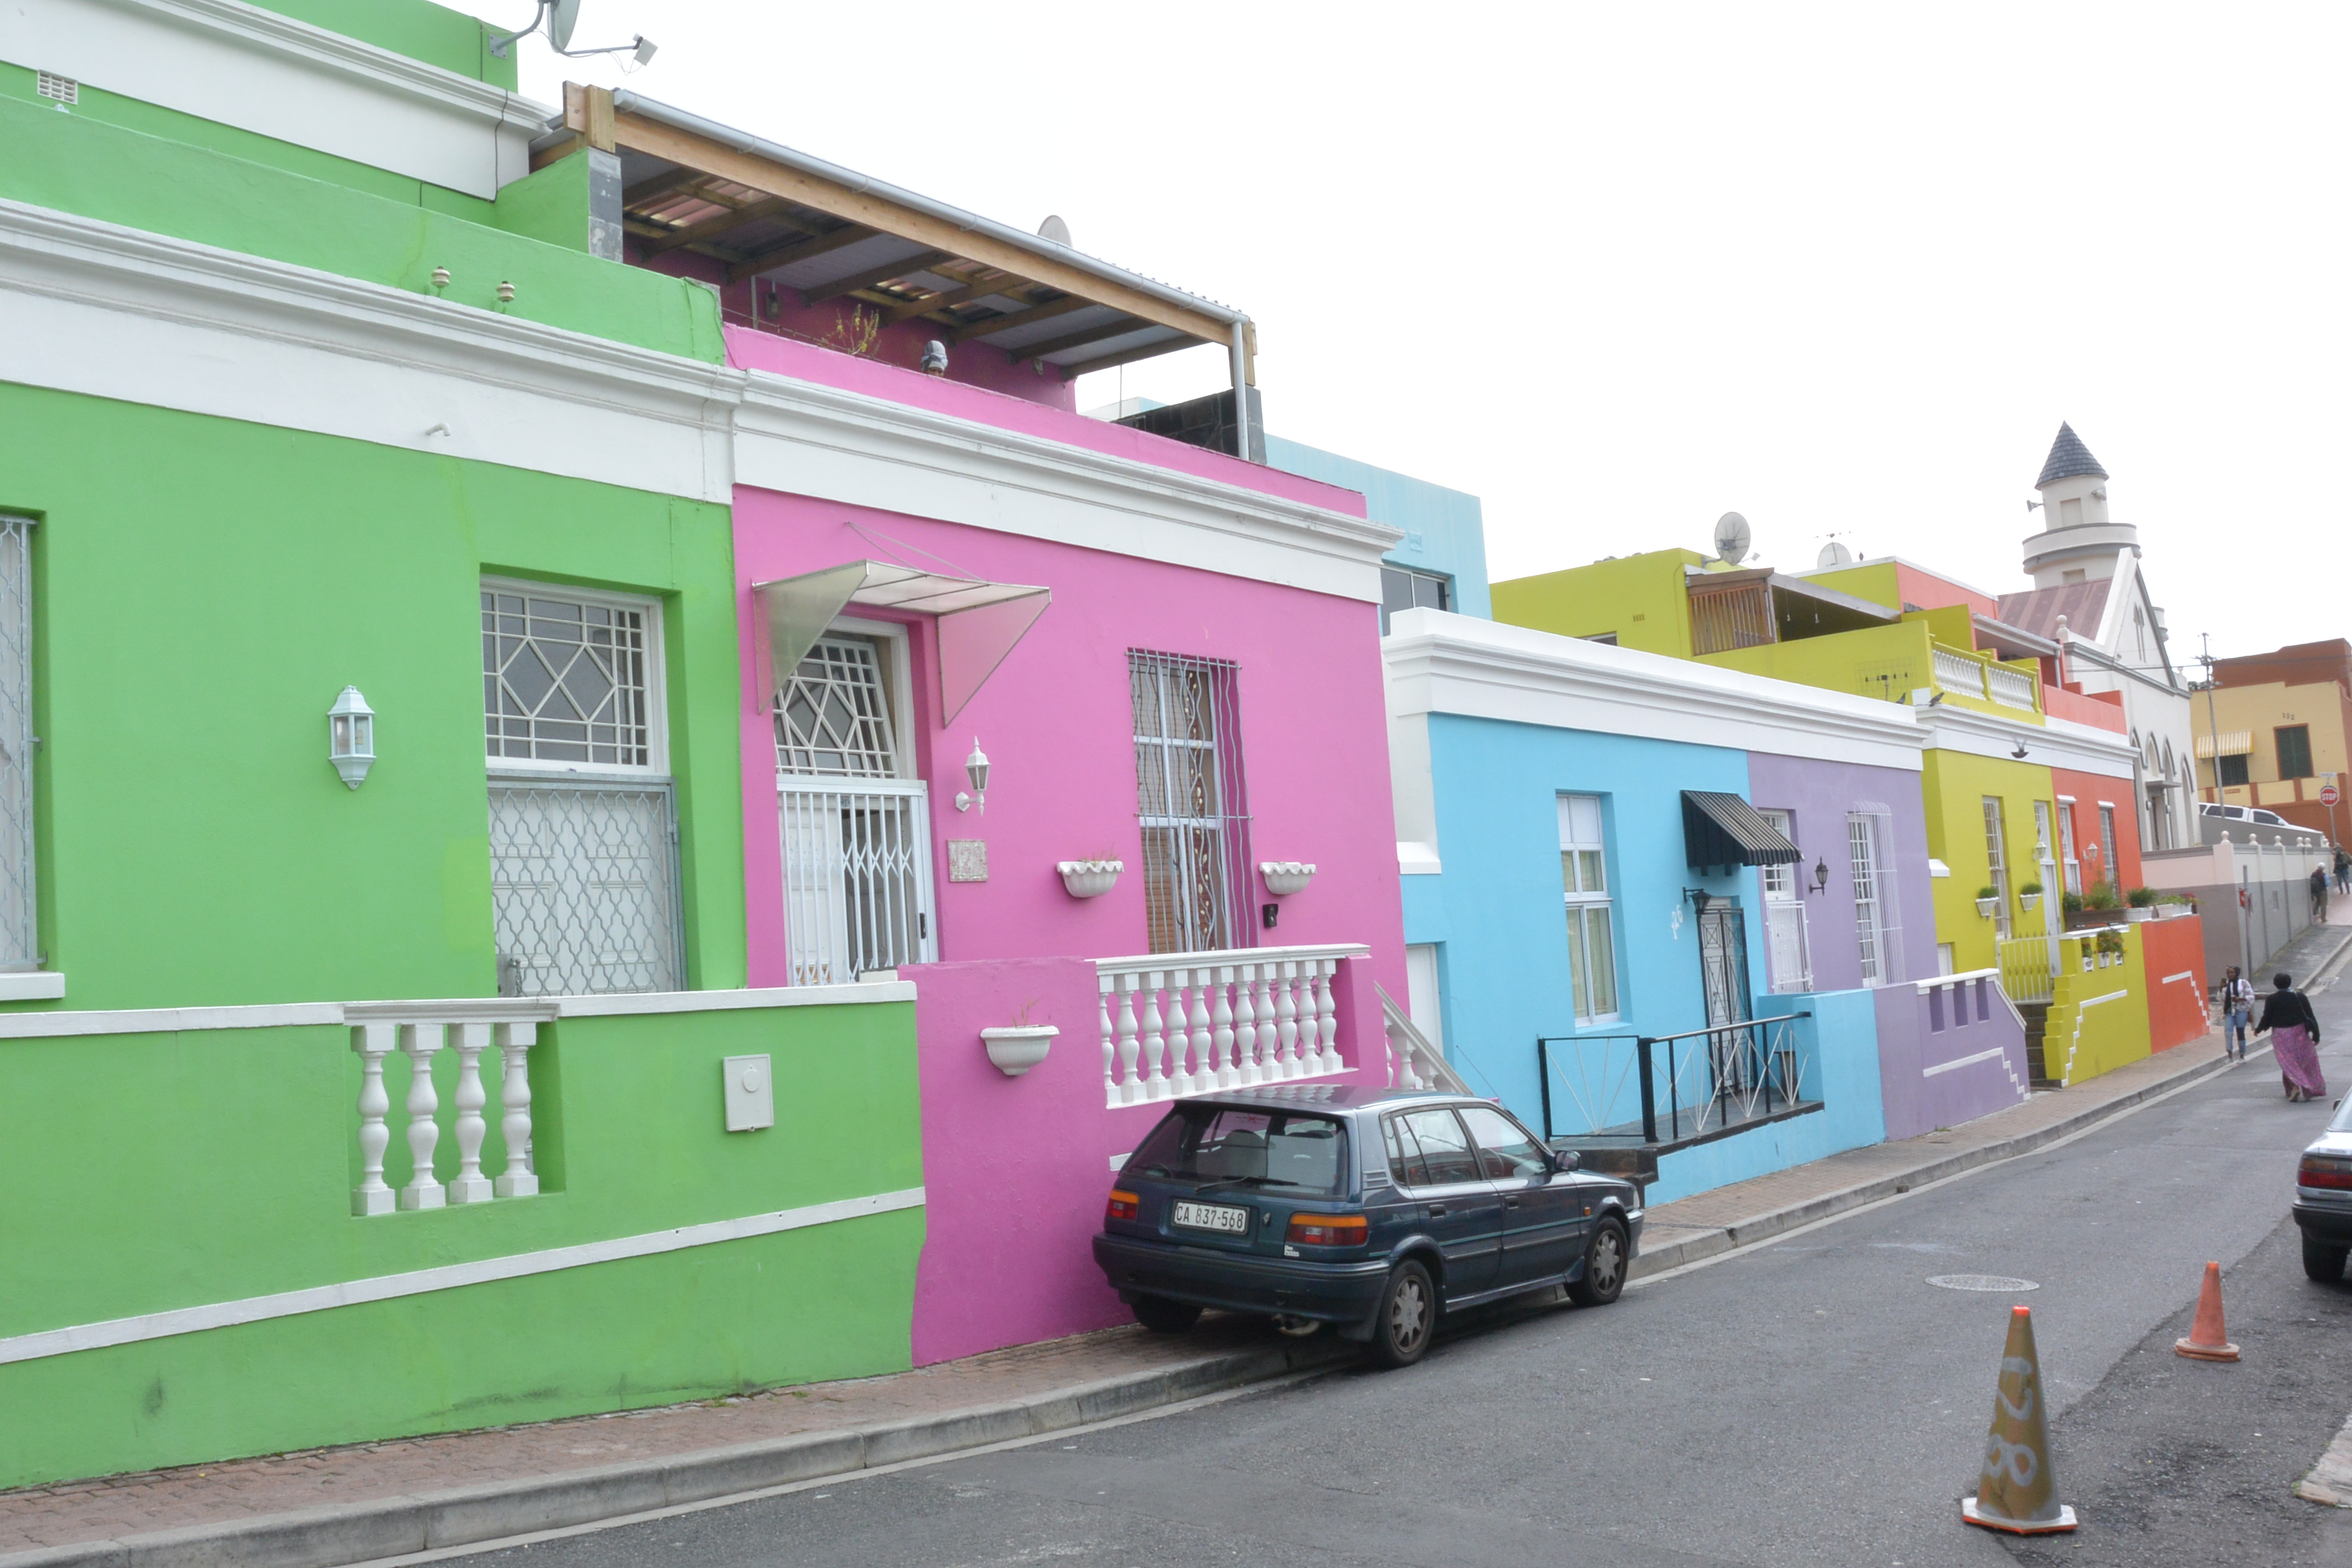 bo-kaap cape town south africa